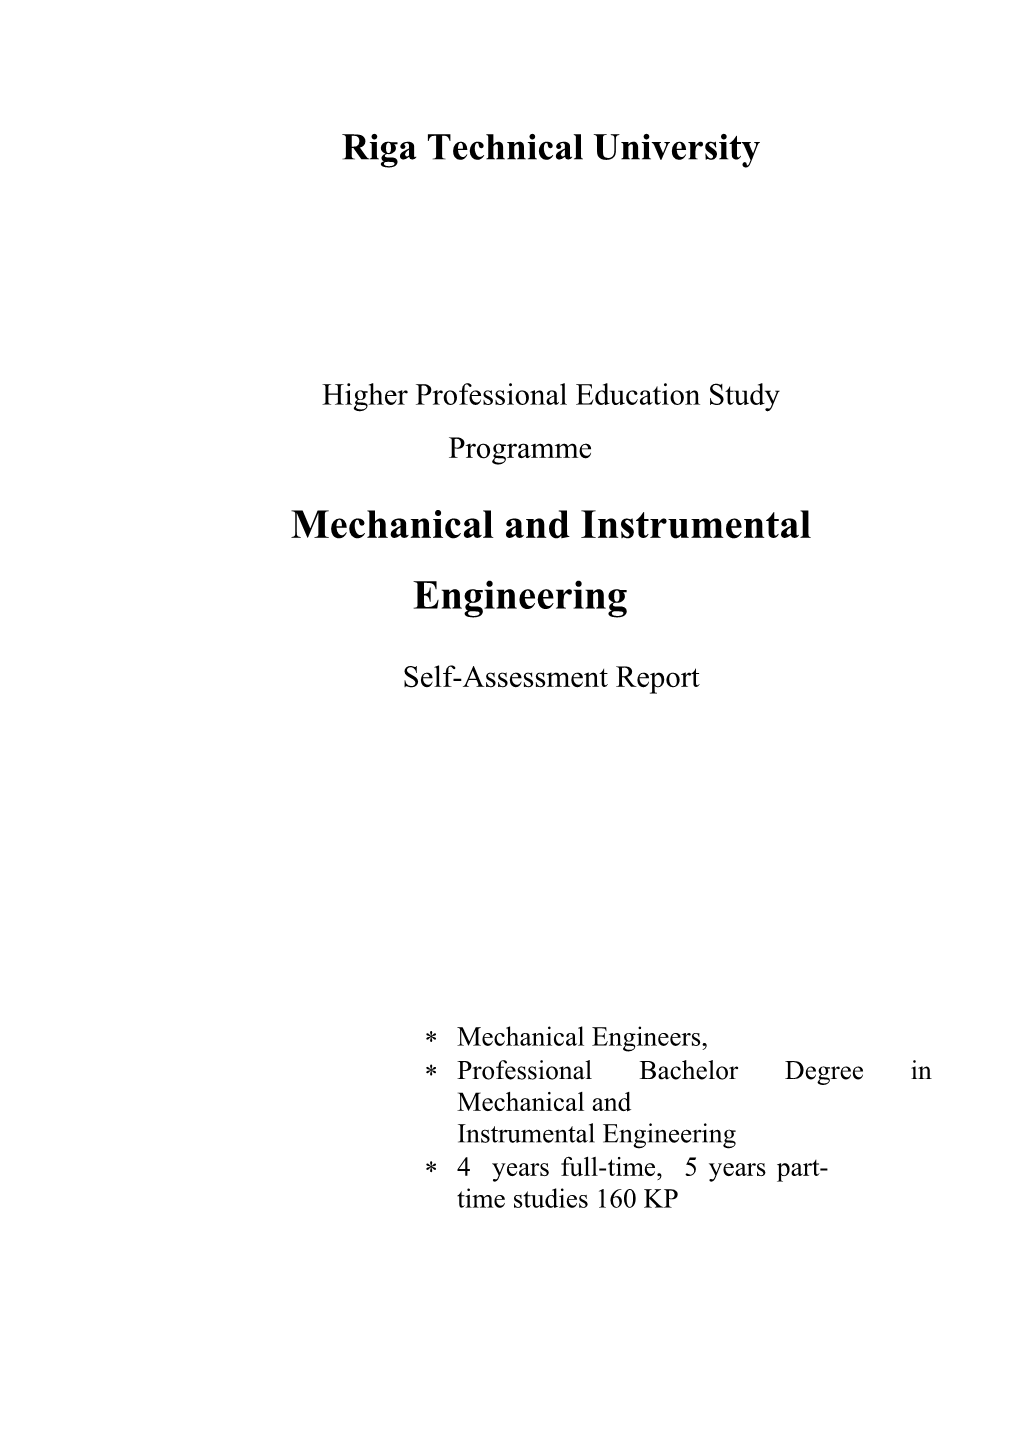 Mechanical and Instrumental Engineering